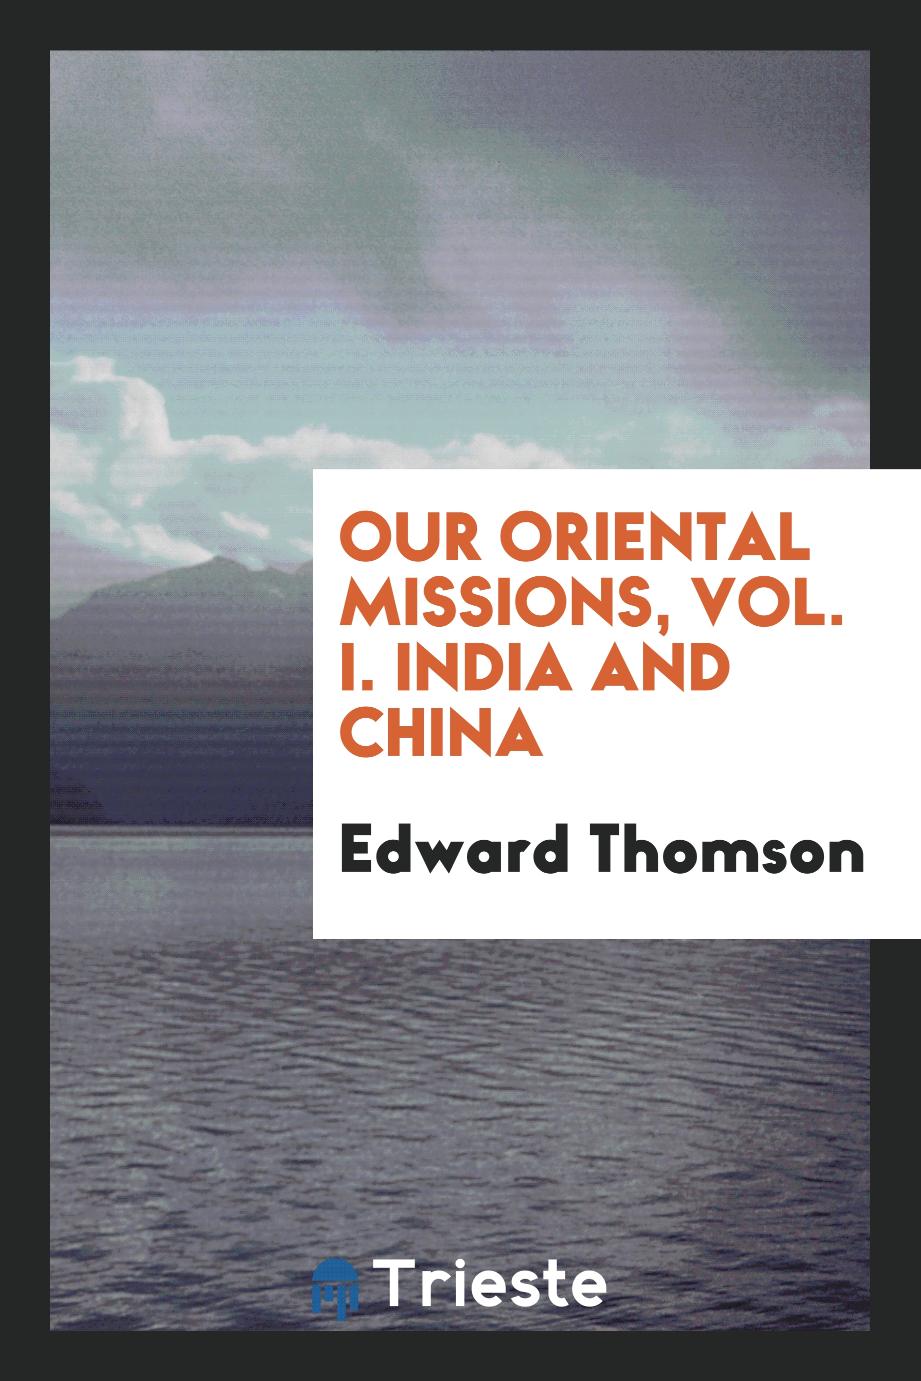 Our oriental missions, Vol. I. india and China